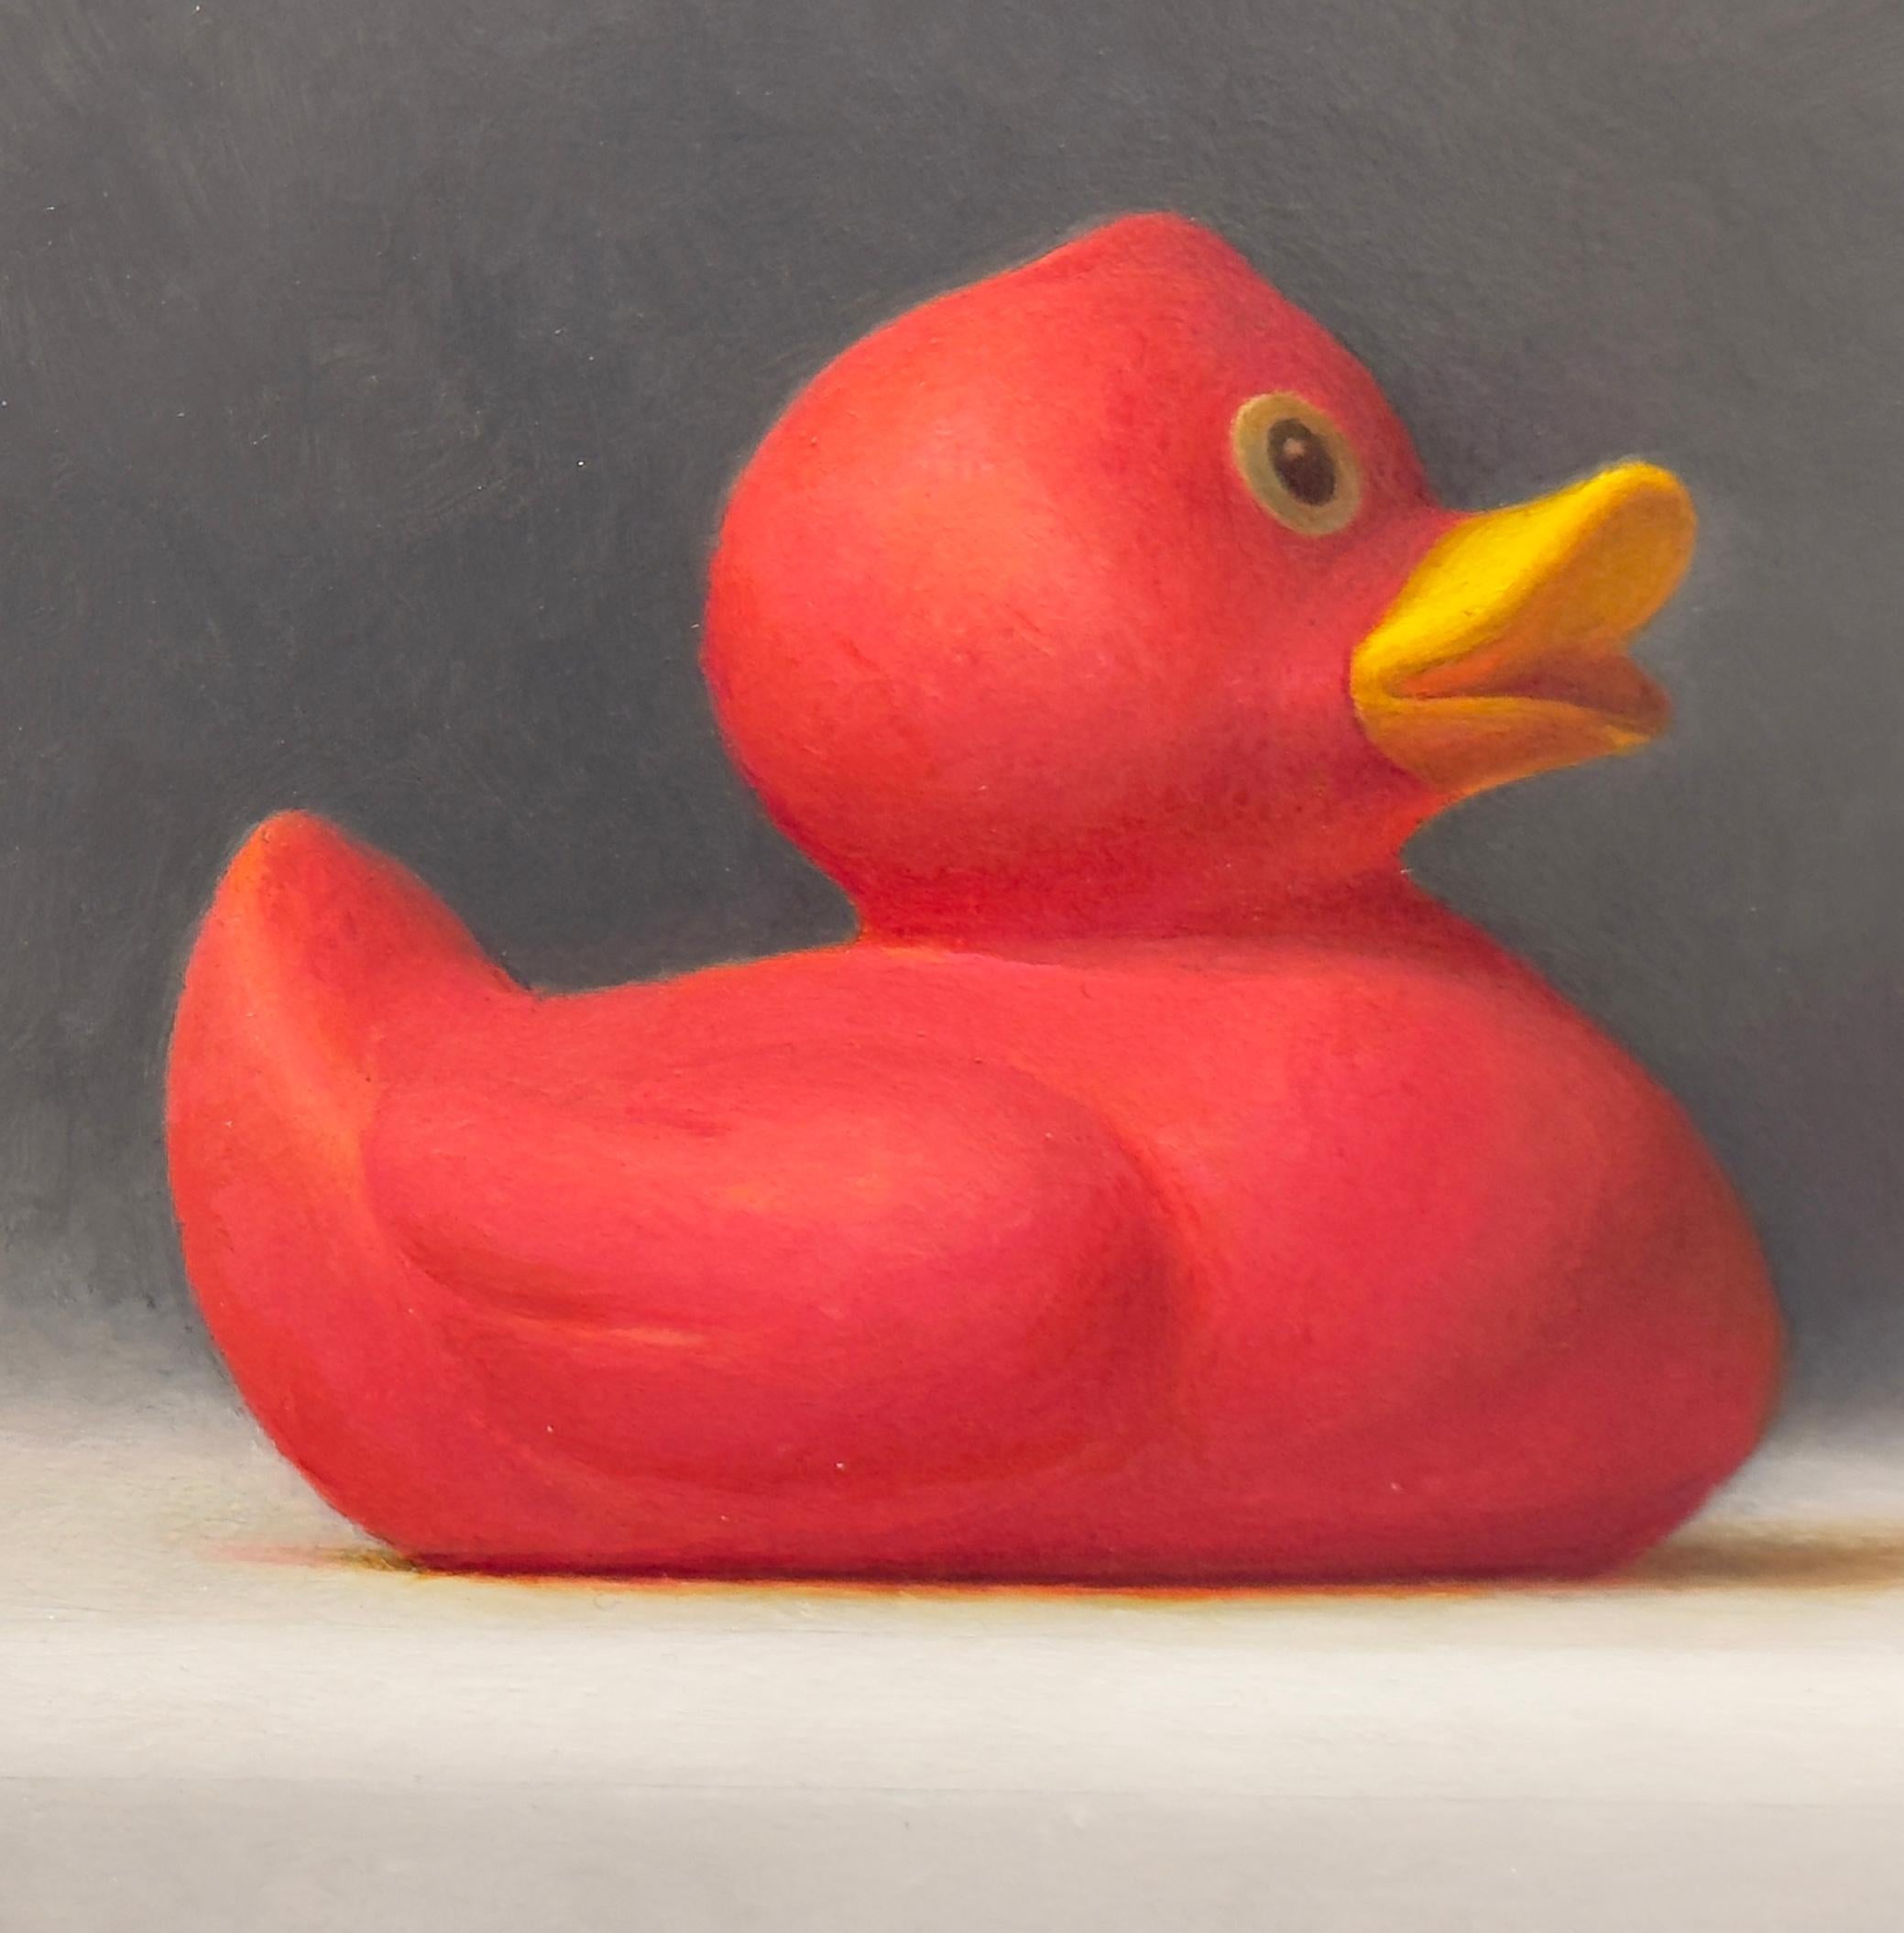 IMPOSTERS #25 (Dragon Fruit and Magenta Duck) - Realism / Toy / Humor For Sale 2